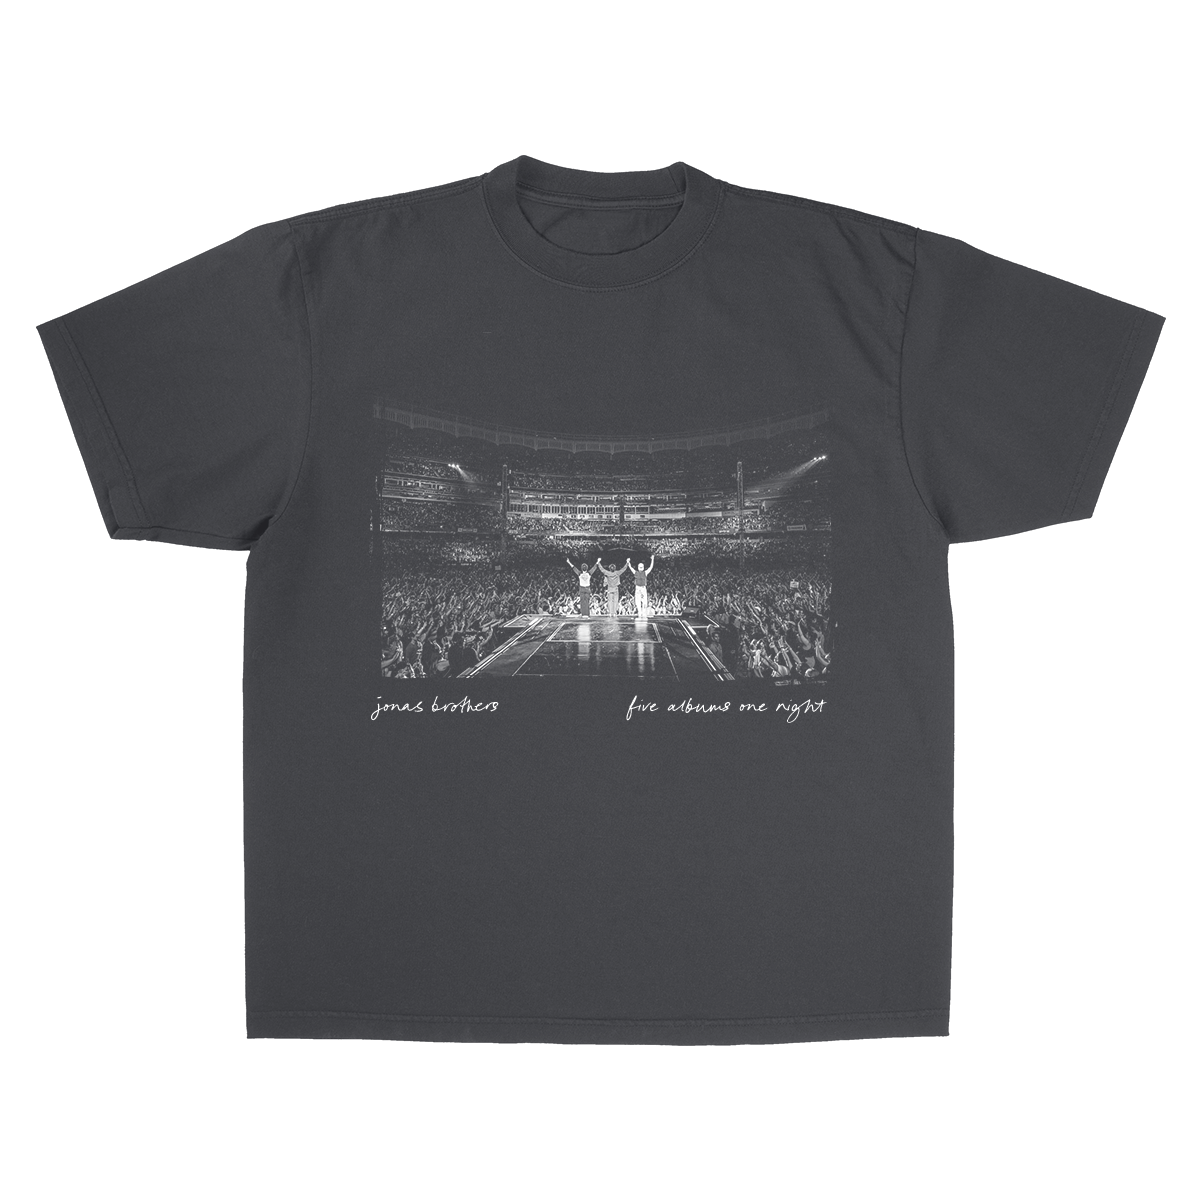 STAGE PIC TEE - GREY